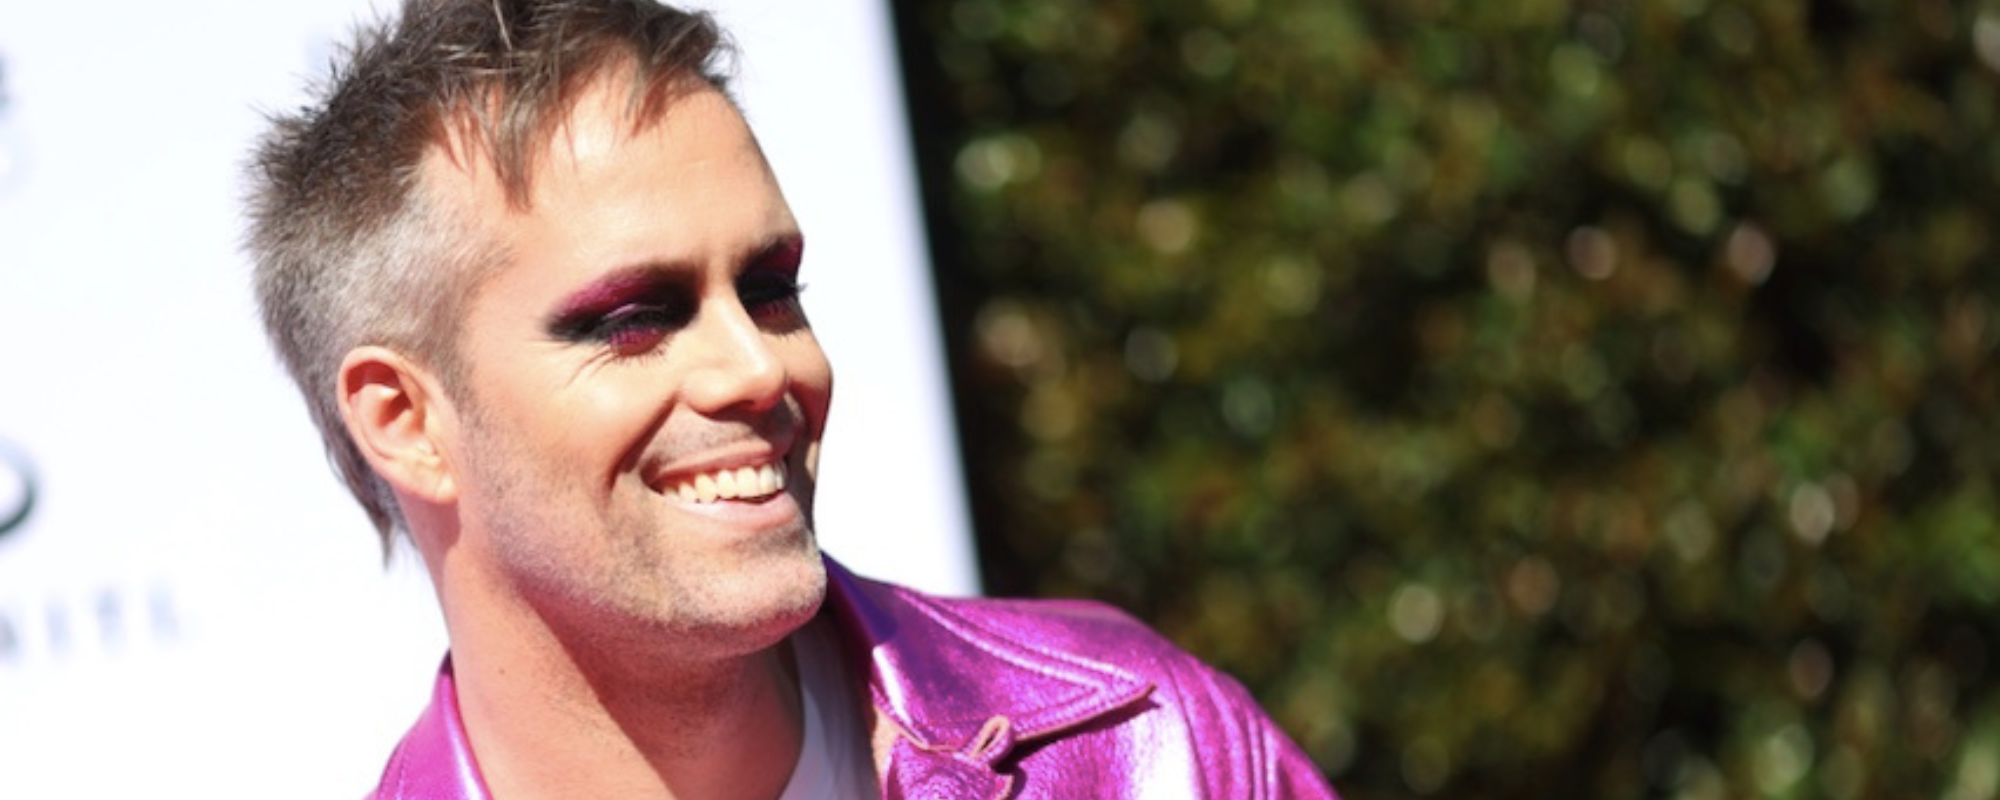 Exclusive: Justin Tranter is “Beyond Honored” for Grammy Songwriter of the Year Nod